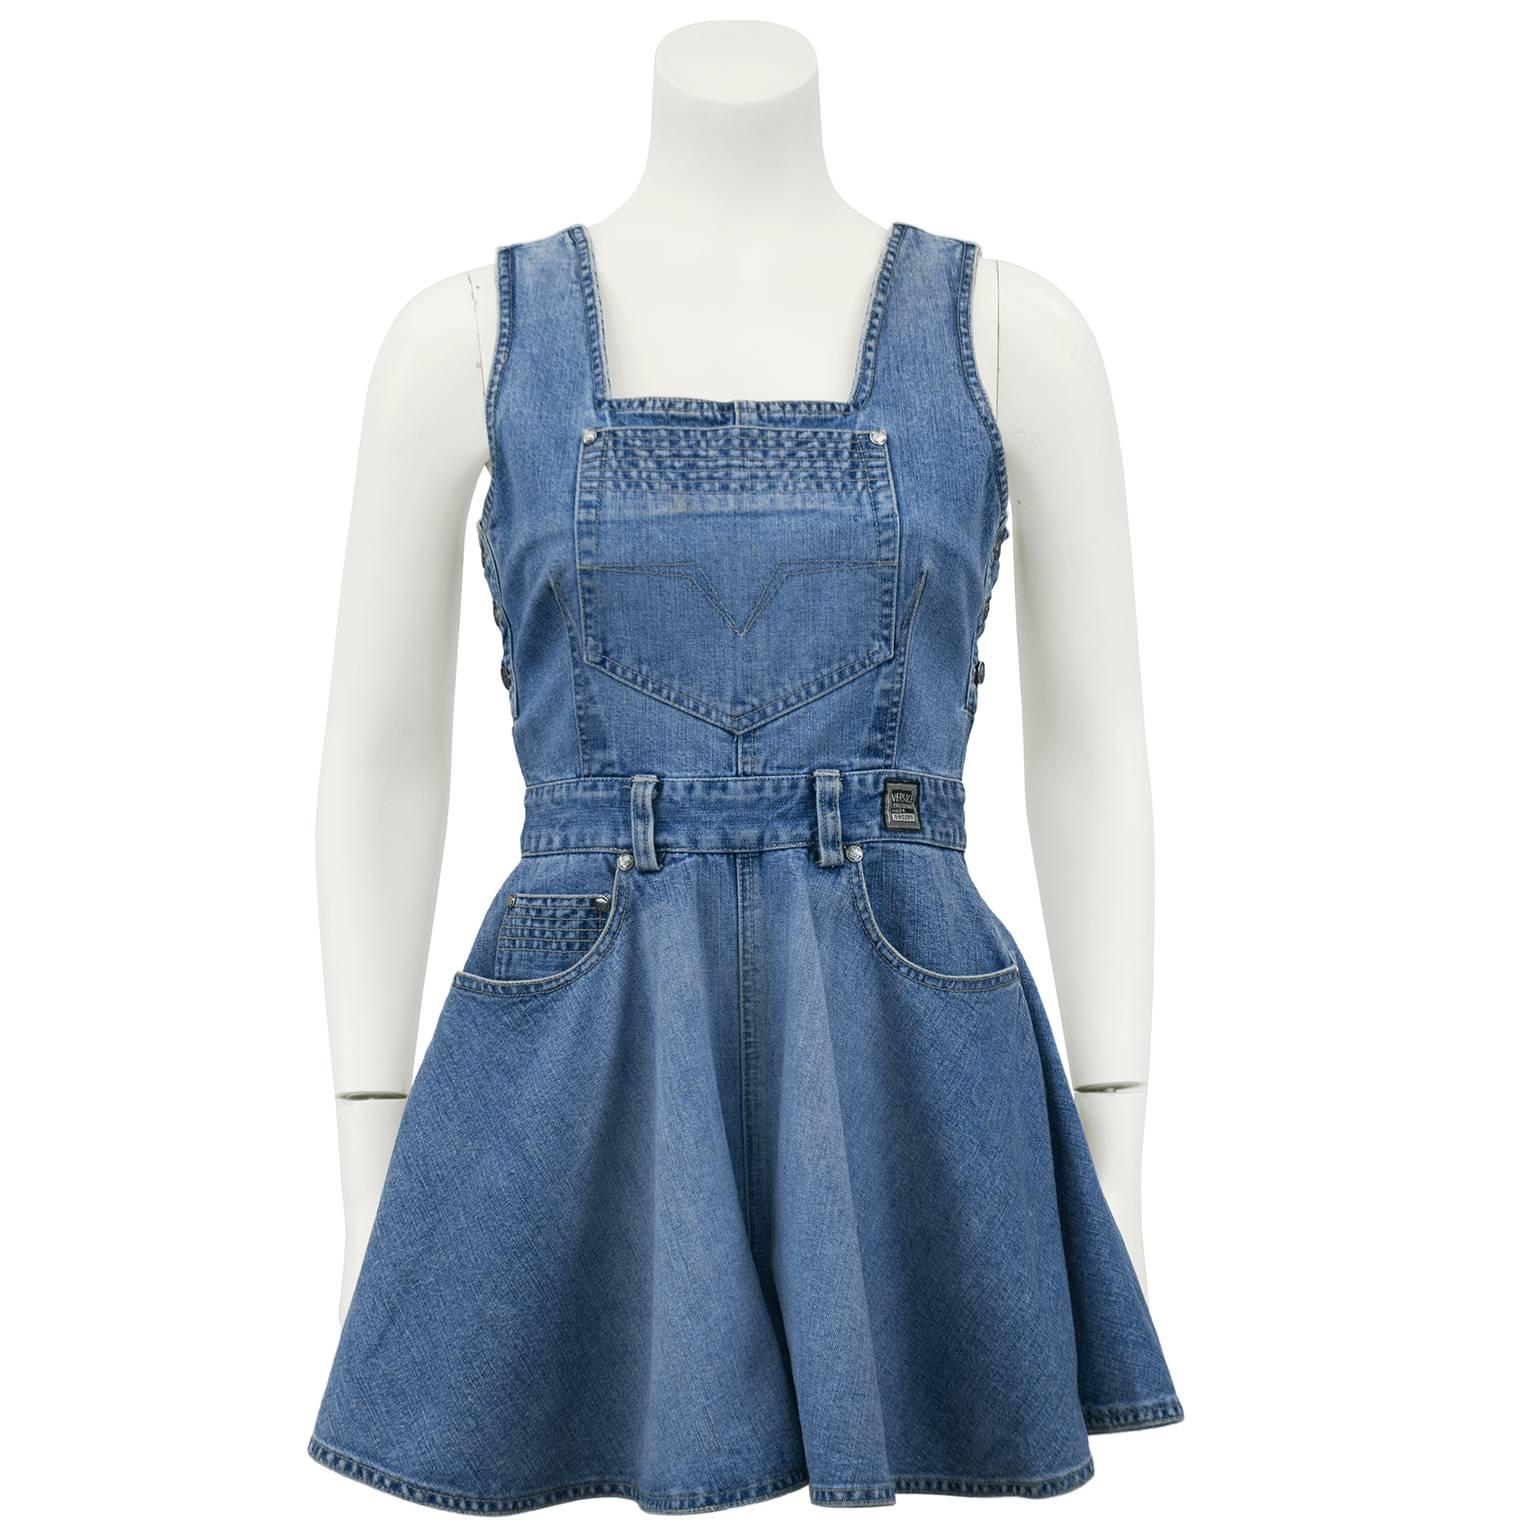 Adorable fit and flare style denim romper from the 1990s. The square neckline is complimented with a classic denim style over sized patch pocket on the bust and button panels down the sides. The waist is accented with belt loops and a Versace label.